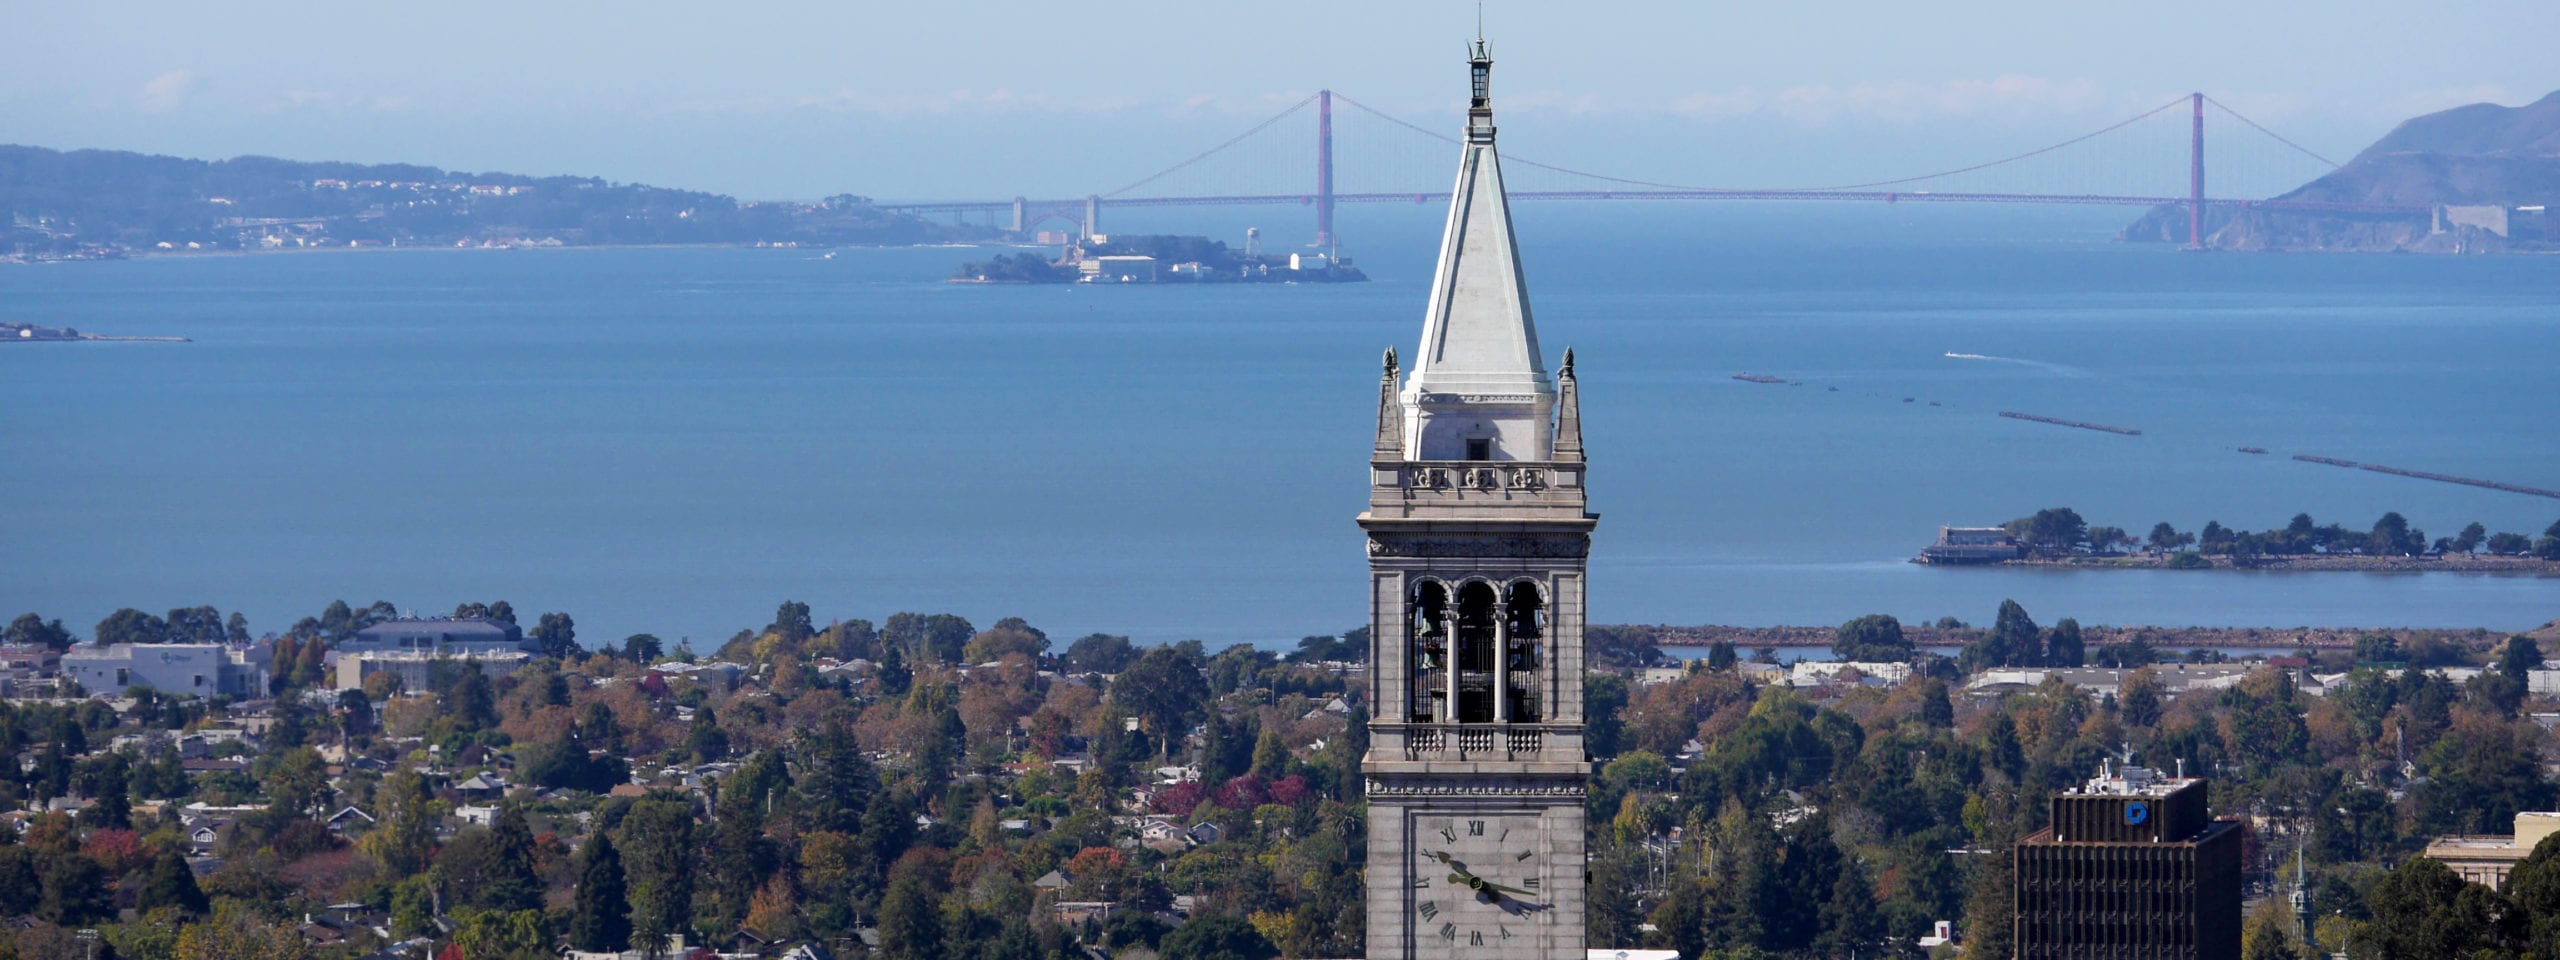 Berkeley Campanile in foreground with bay and Golden Gate Bridge in background